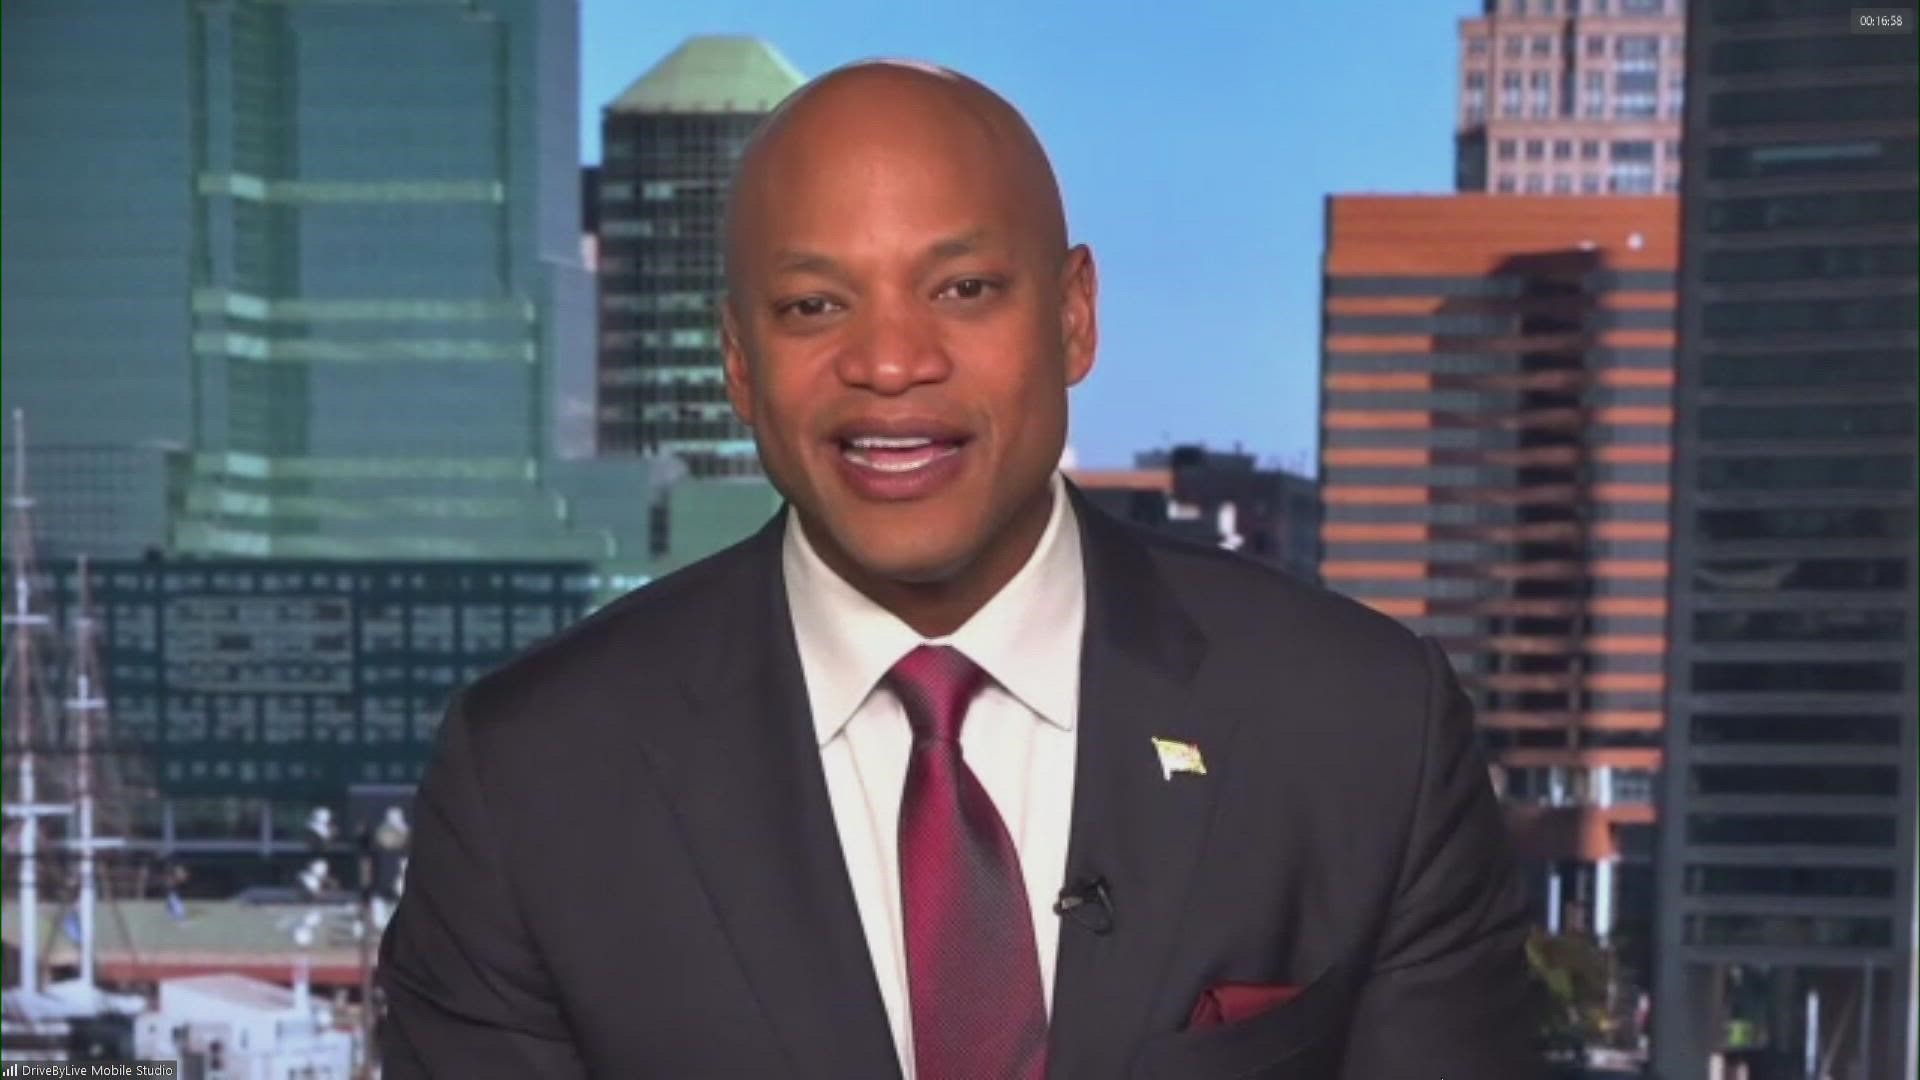 The Associated Press is reporting Democrat Wes Moore has defeated Republican Dan Cox in the race for Governor.